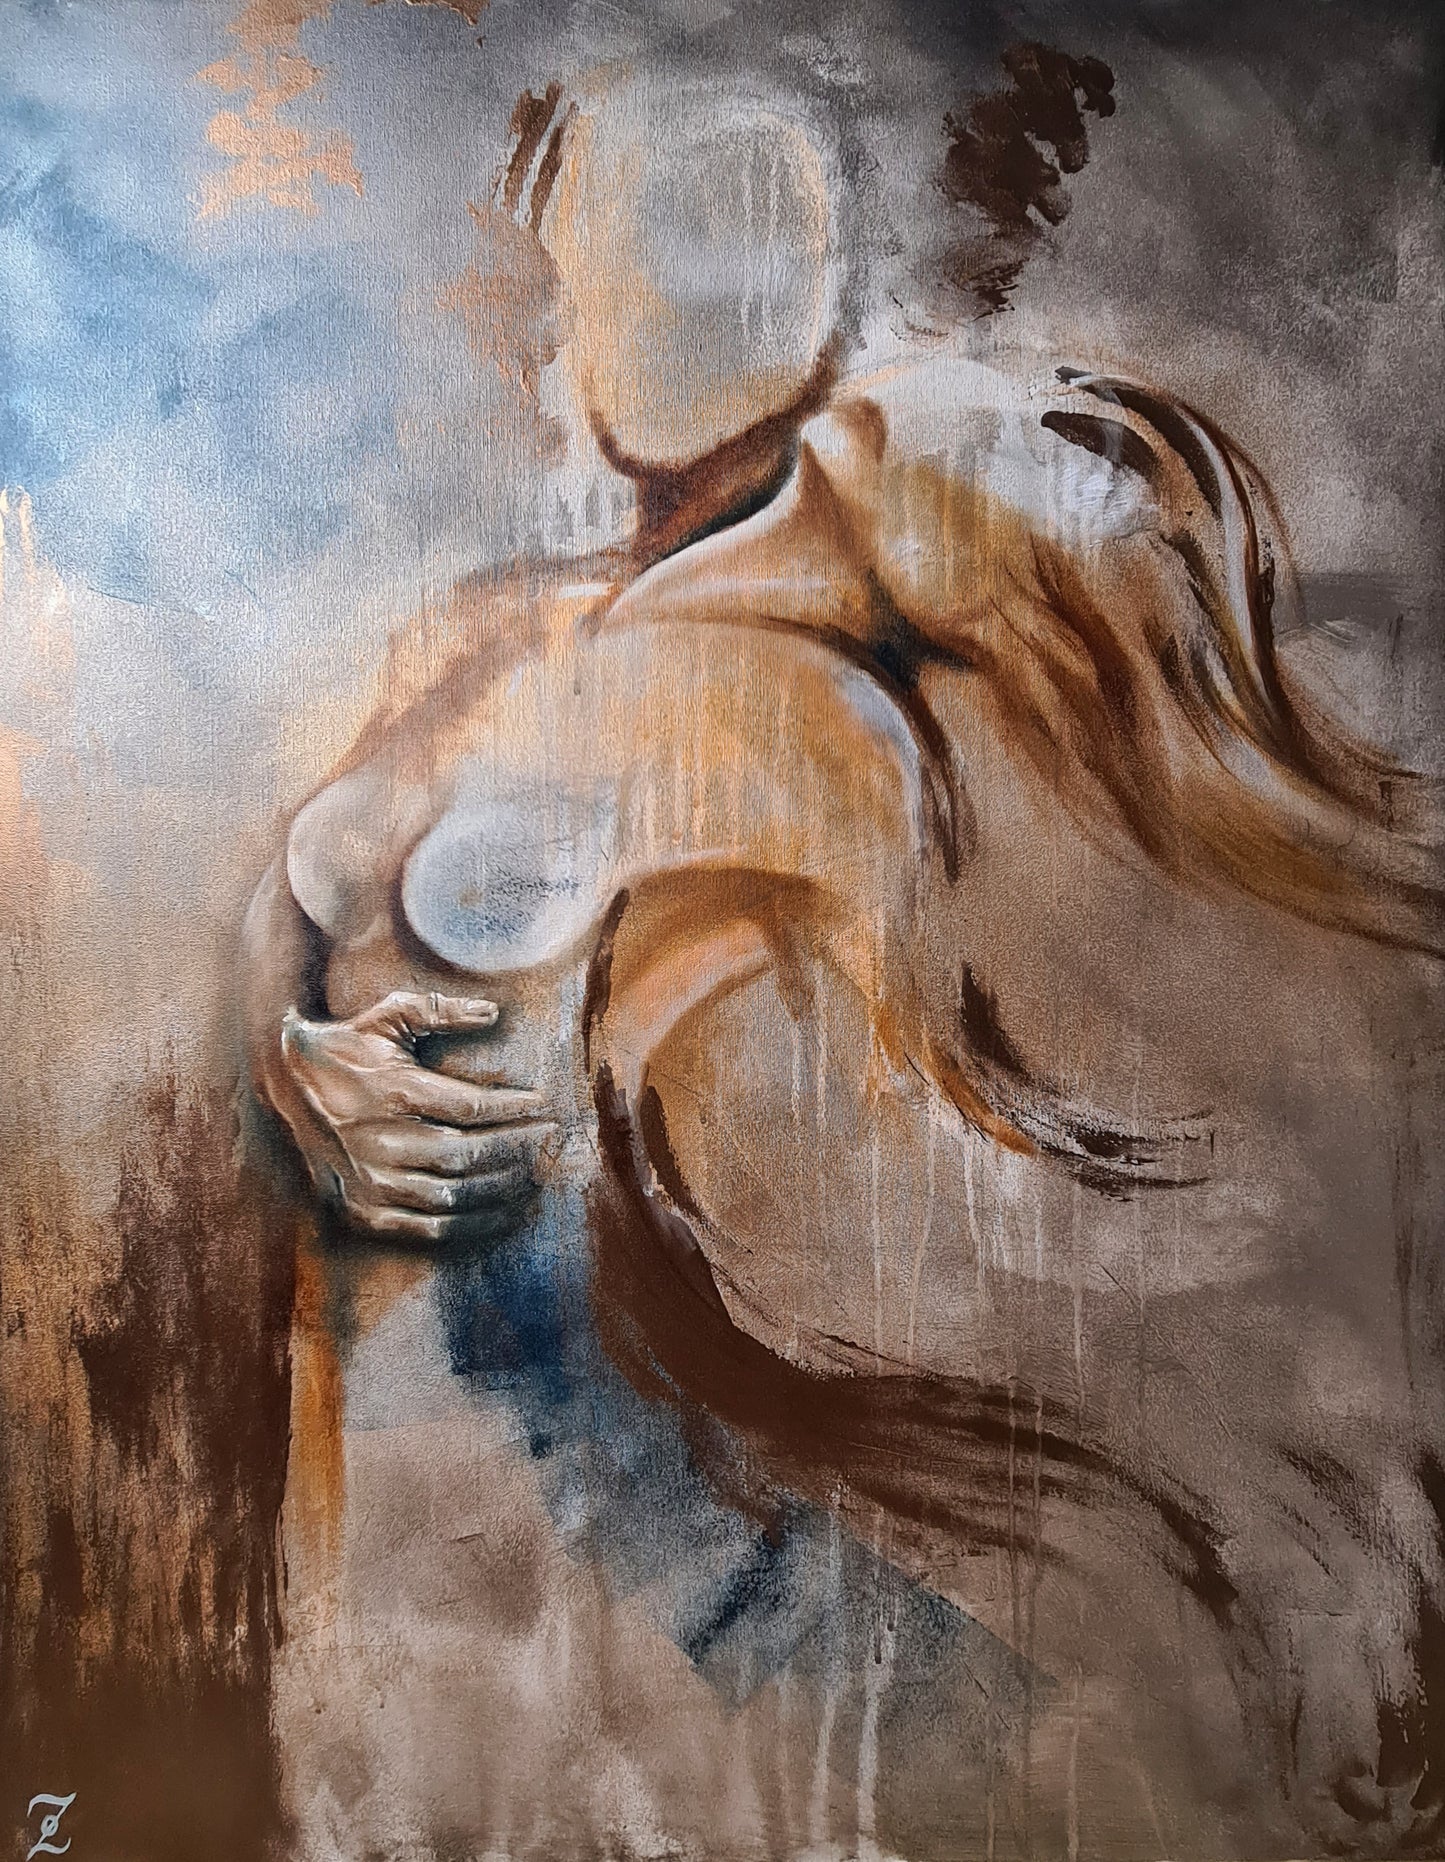 Original painting on canvas: "First Dance" 80x100cm